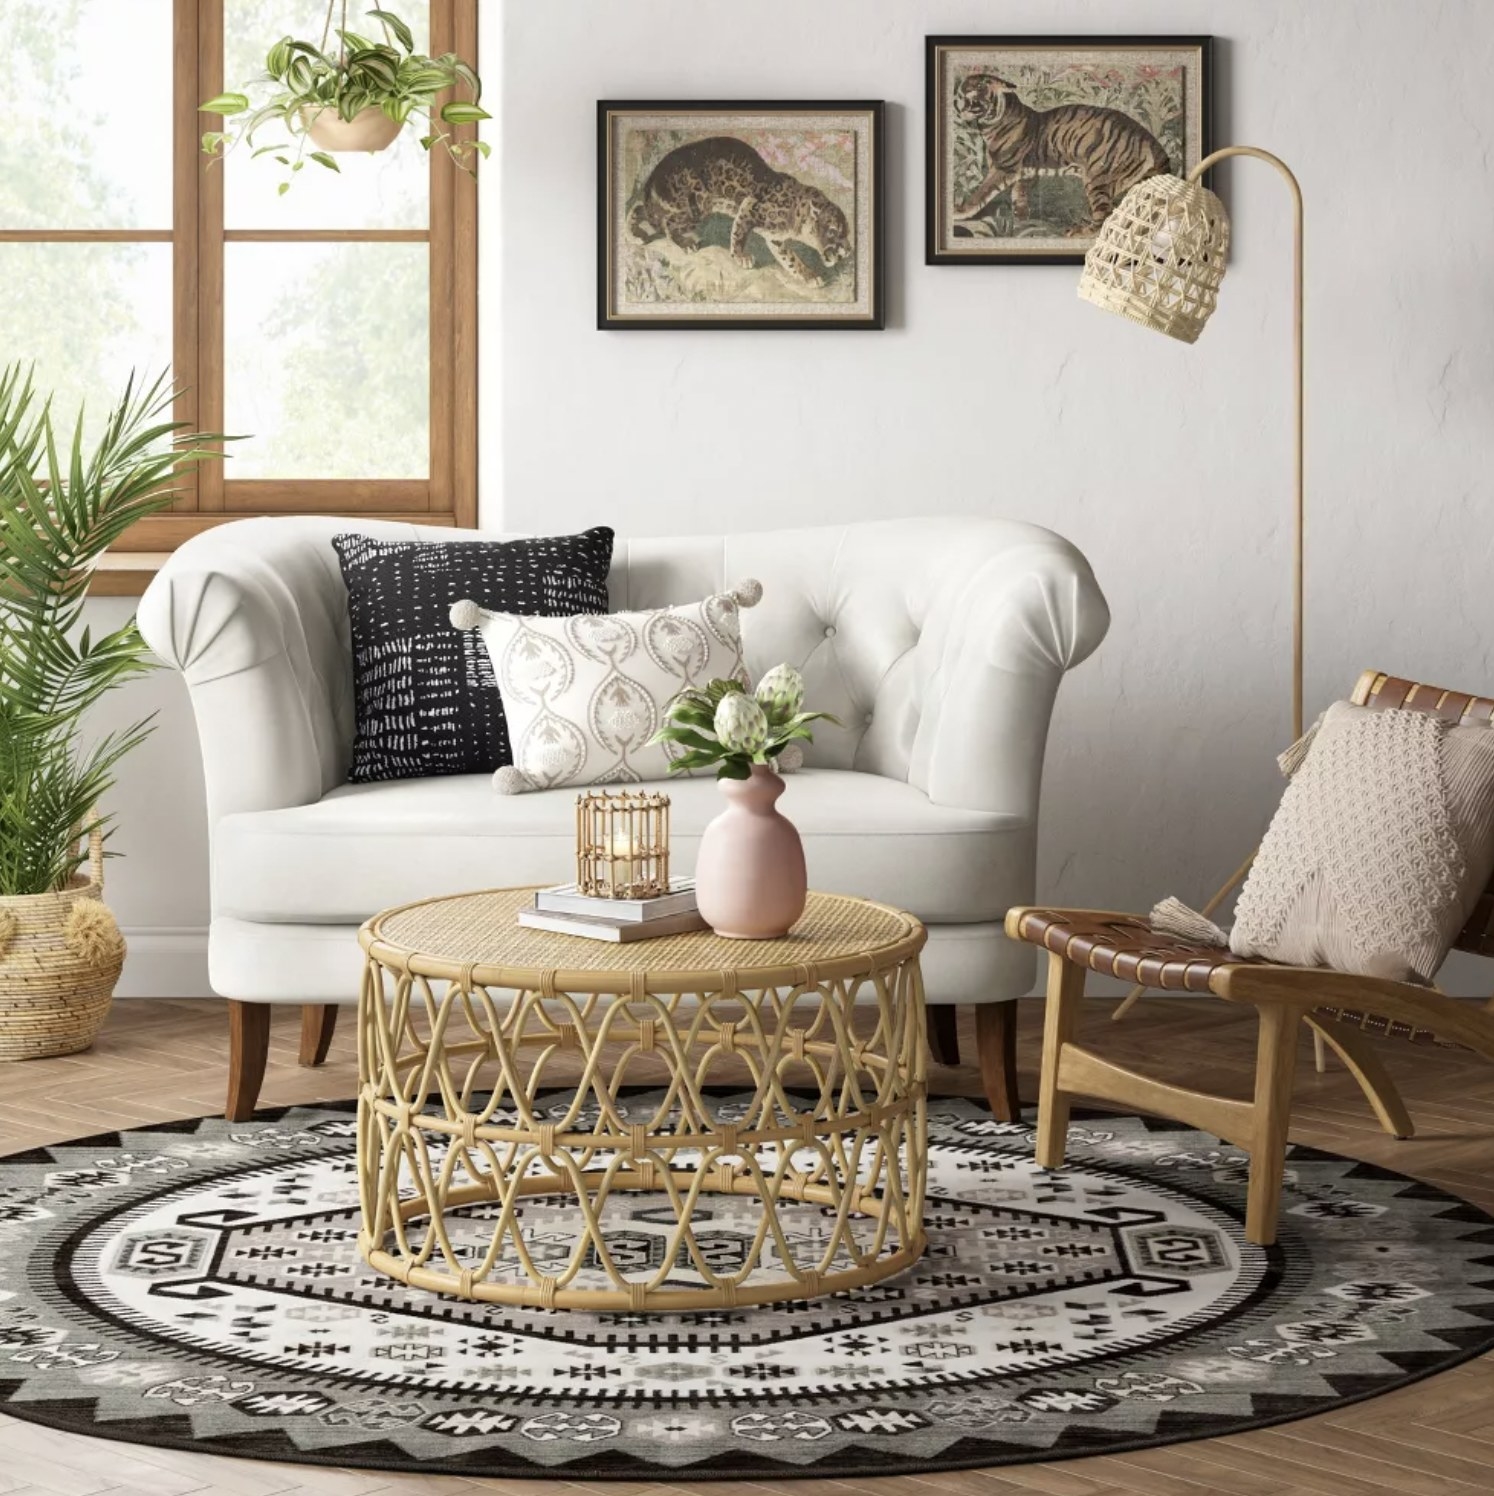 The patterned area rug underneath boho coffee table